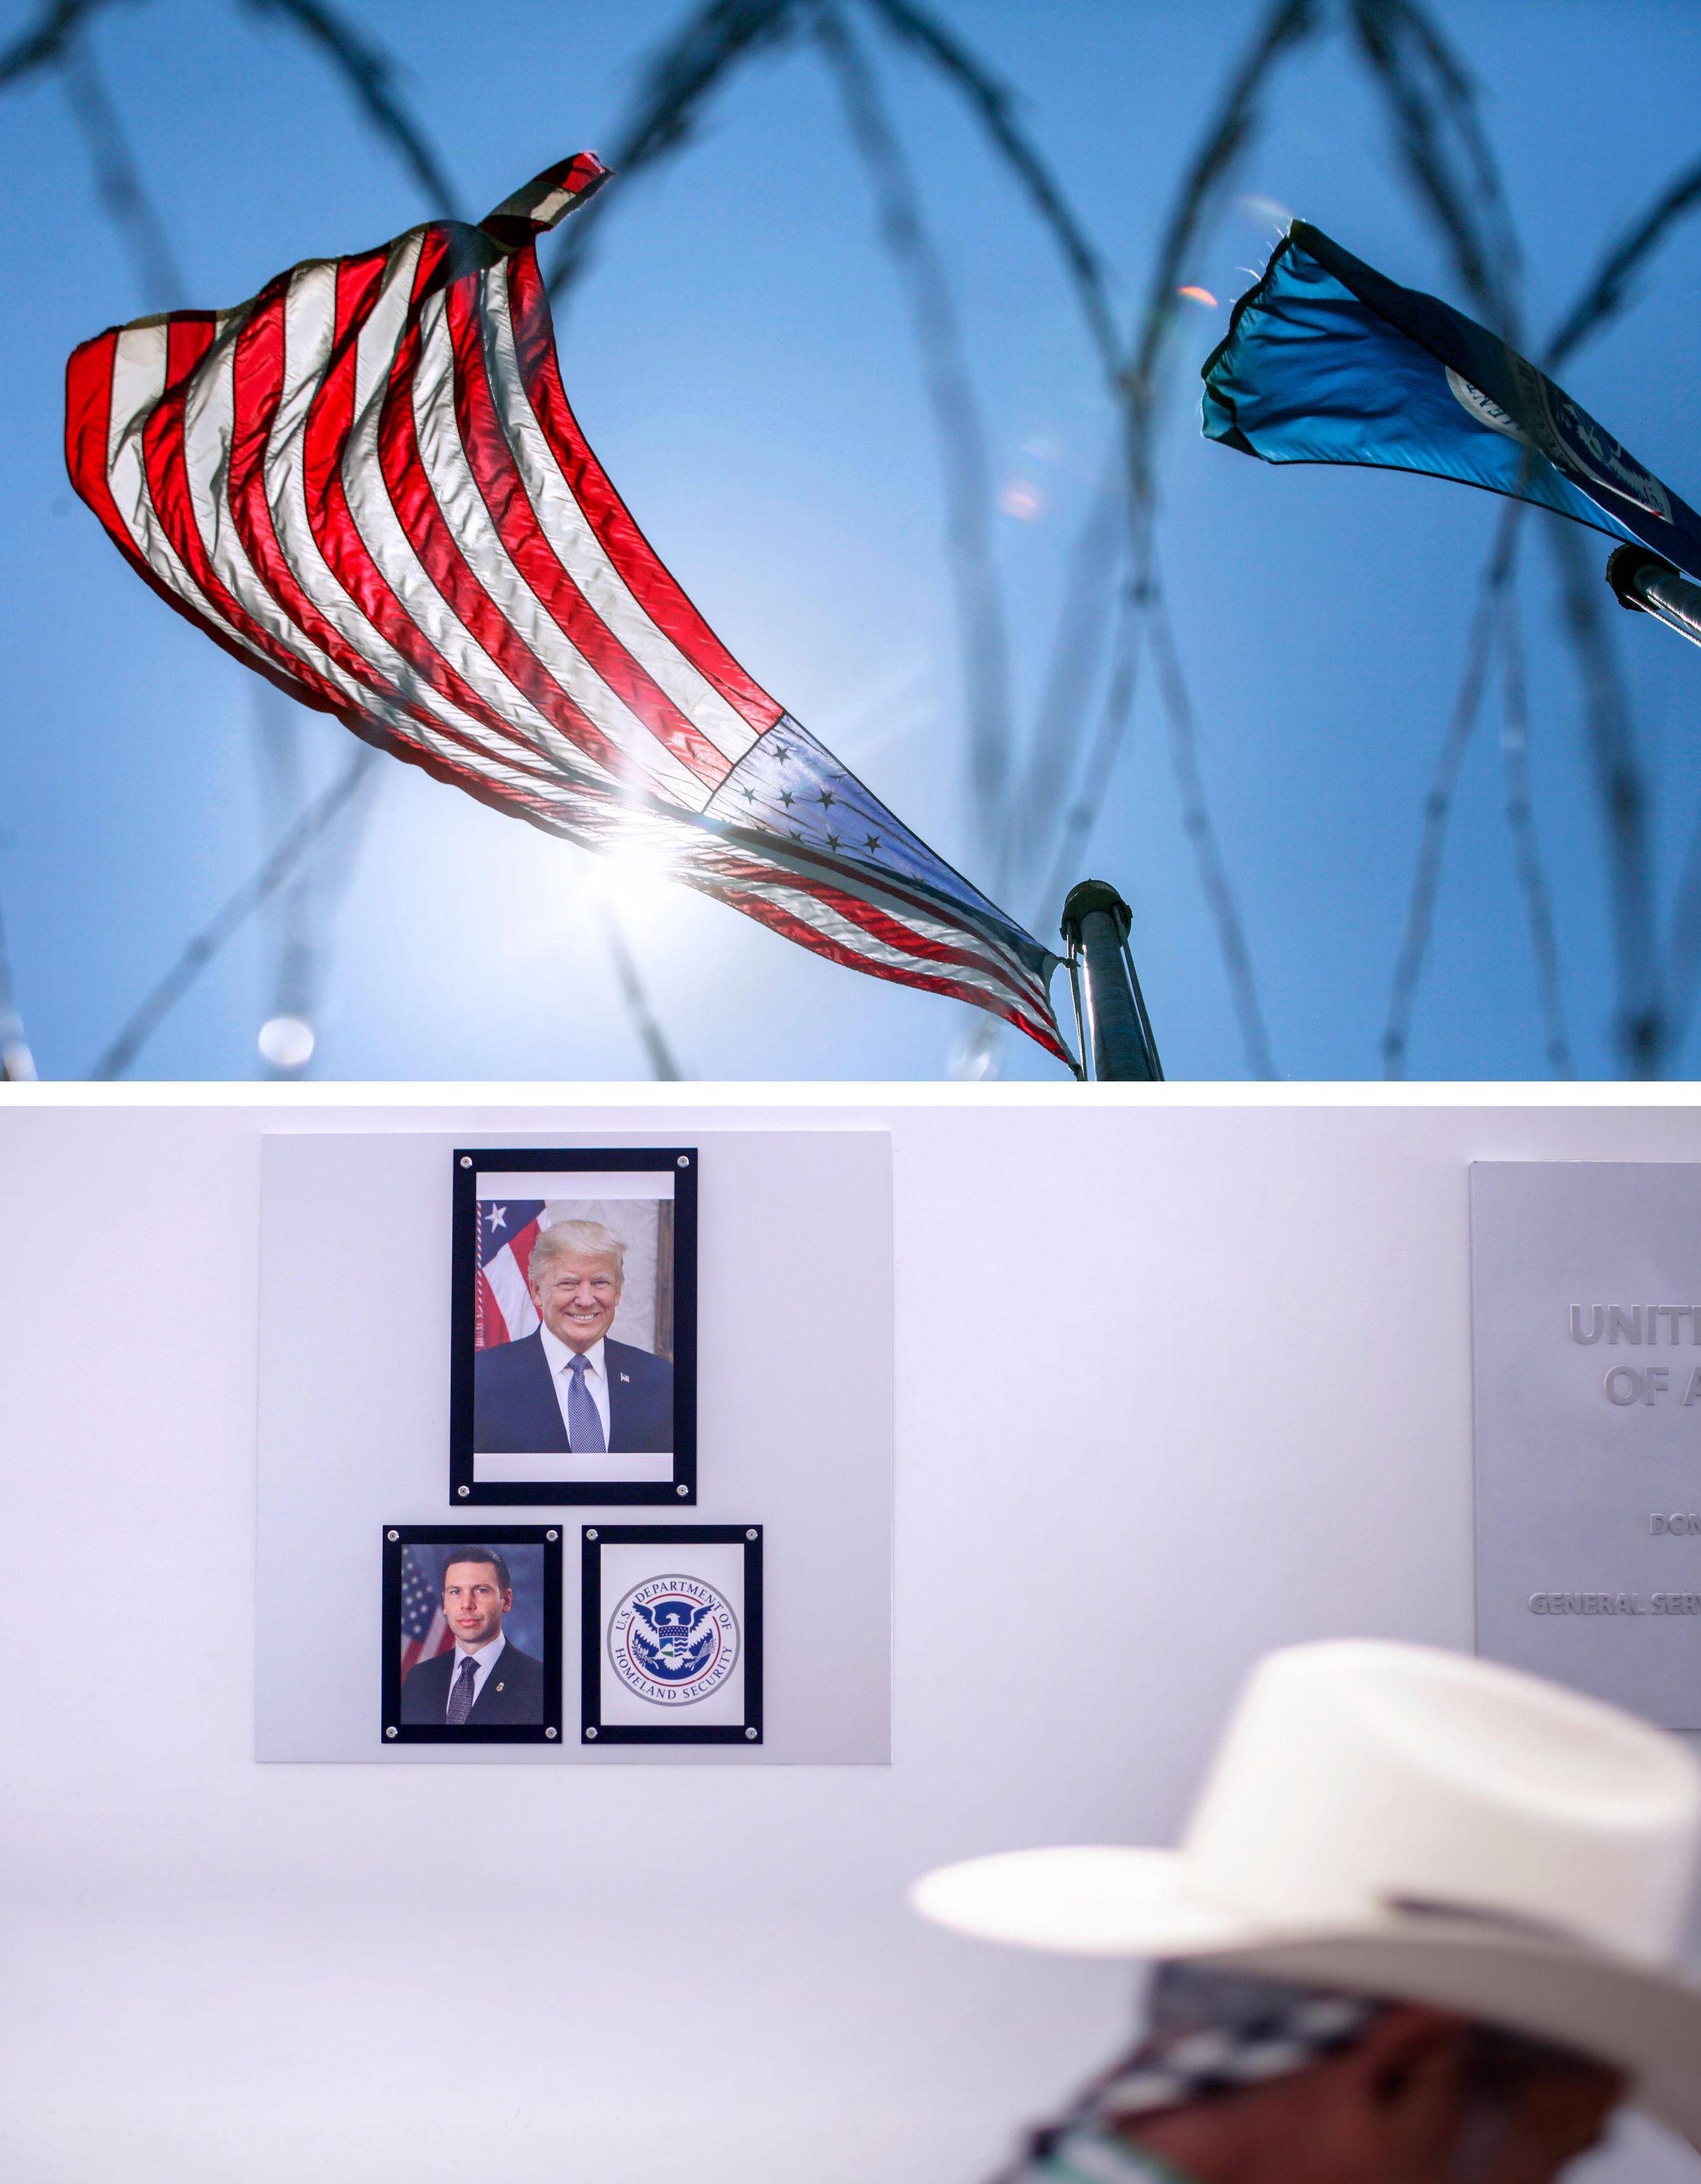 Top: A U.S. flag flies at the San Luis border crossing. Bottom: The wall travelers pass after entering the United States include portraits of President Donald Trump and acting Homeland Security Secretary Kevin McAleenan. Image by Kathleen Flynn. United States, 2019.